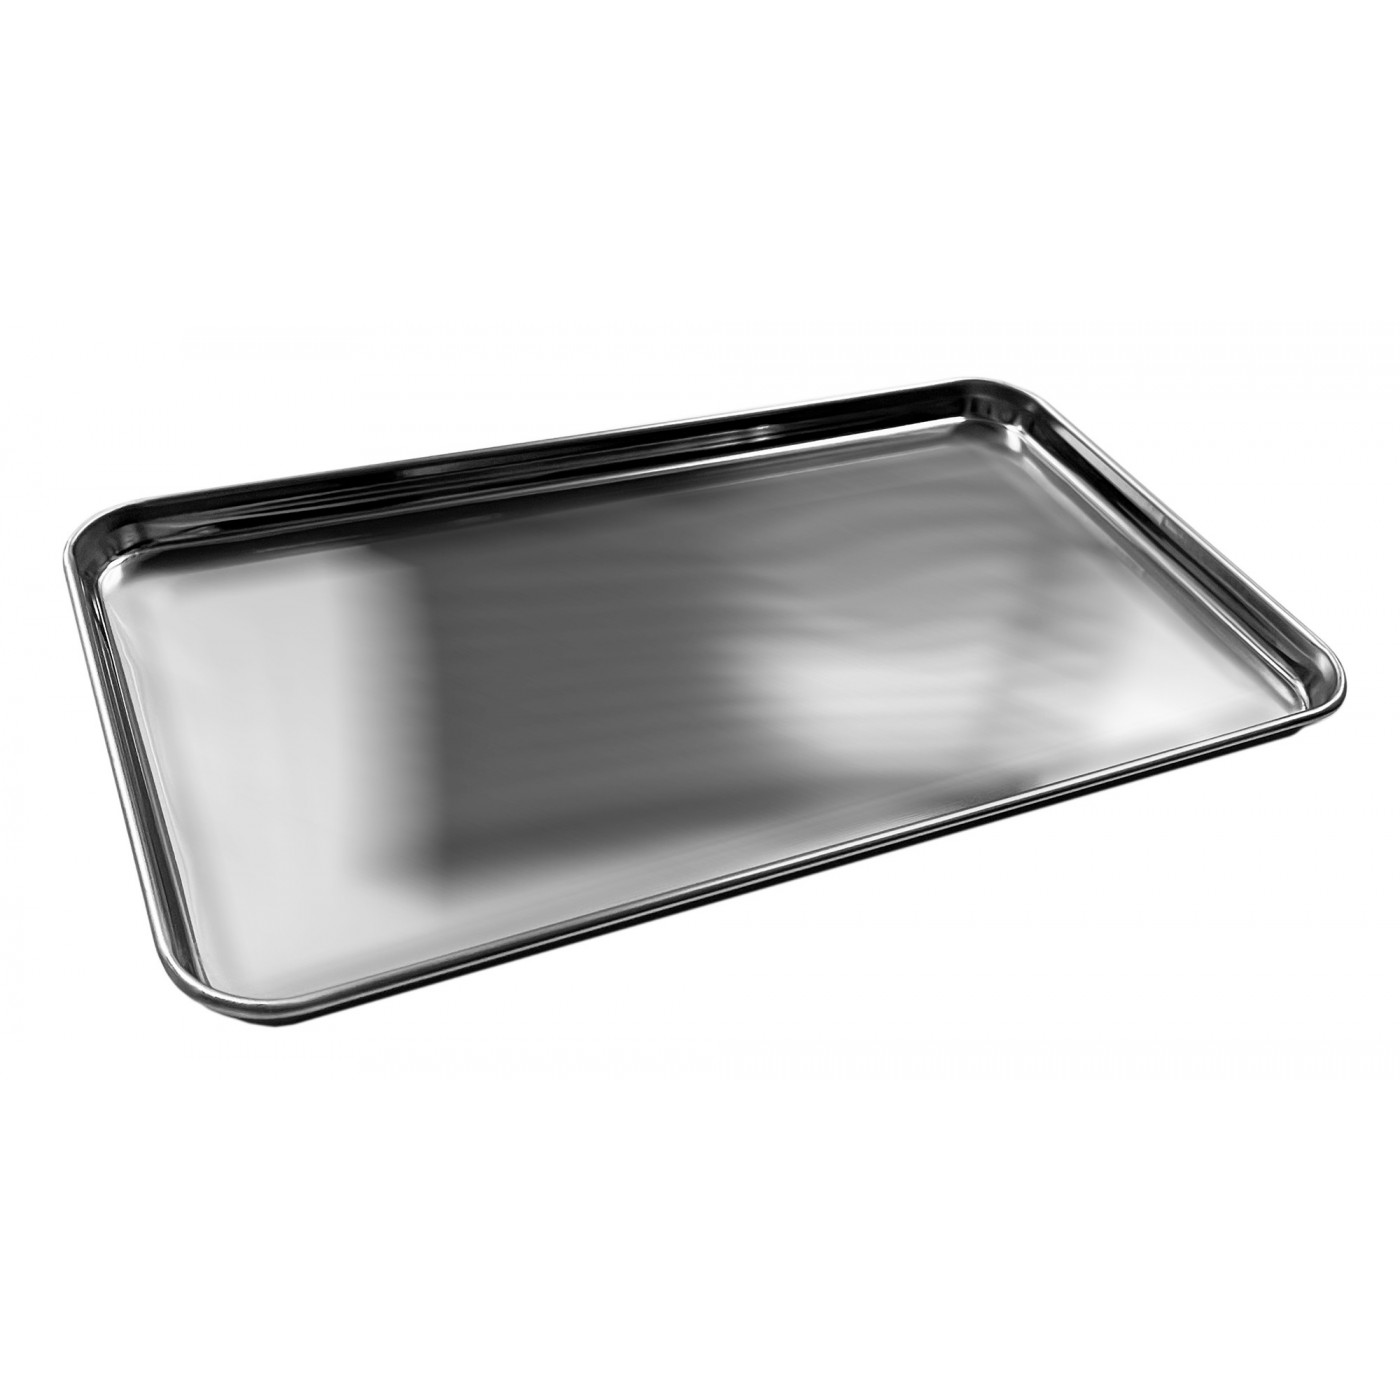 Stainless steel serving plate (26x15 cm, 12 mm height)